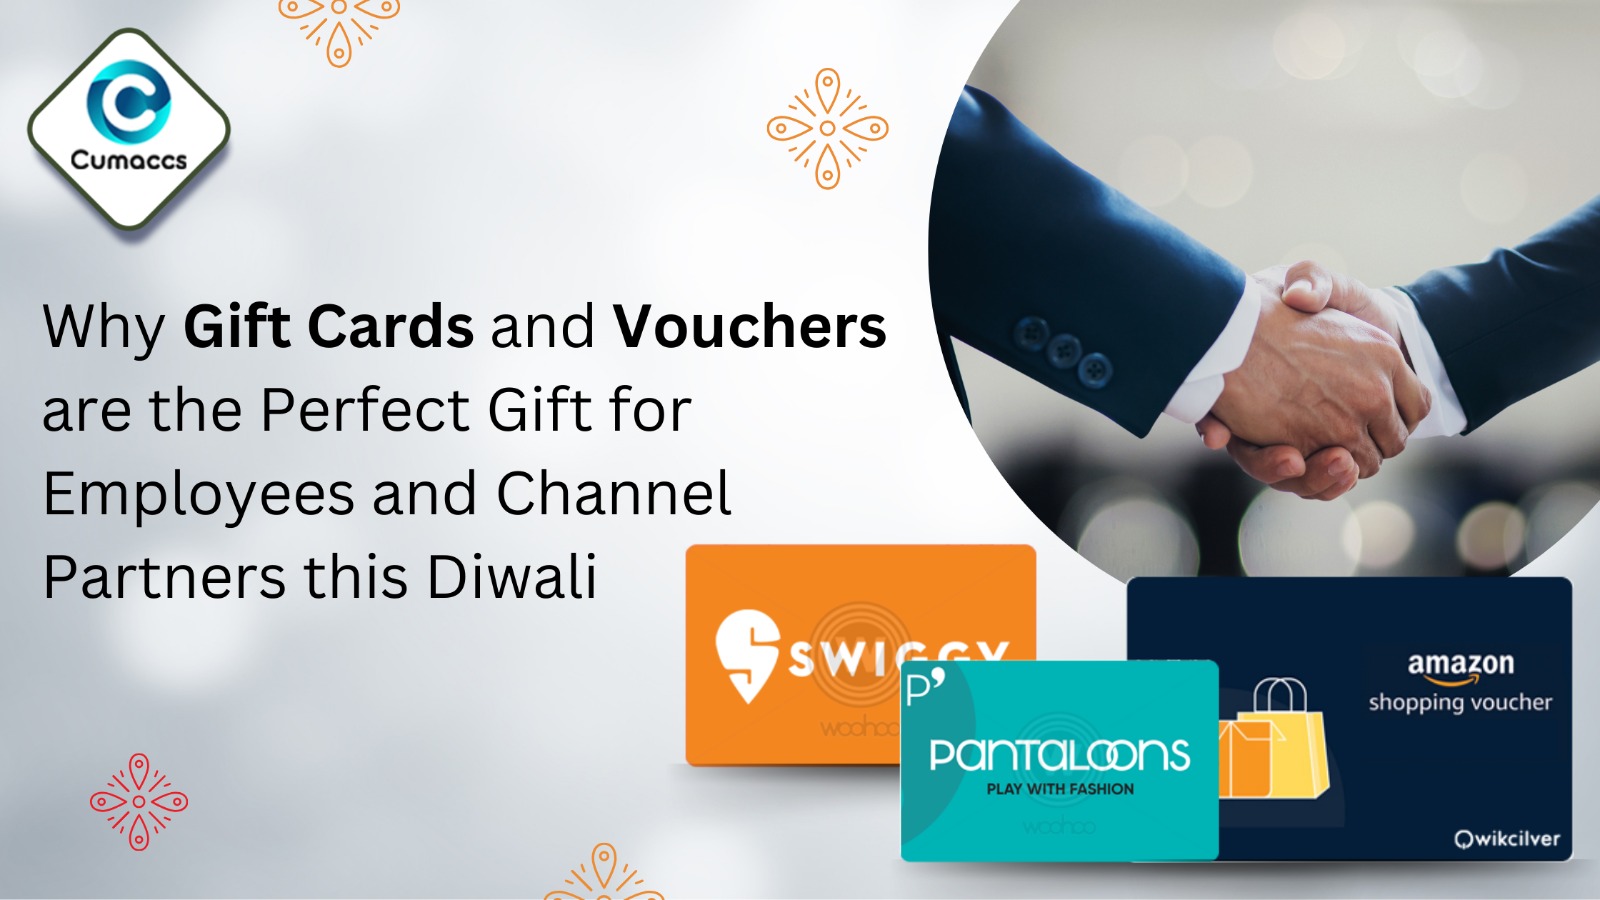 You are currently viewing Why are Gift Cards and Vouchers the Perfect Gift for Employees and Channel Partners this Diwali